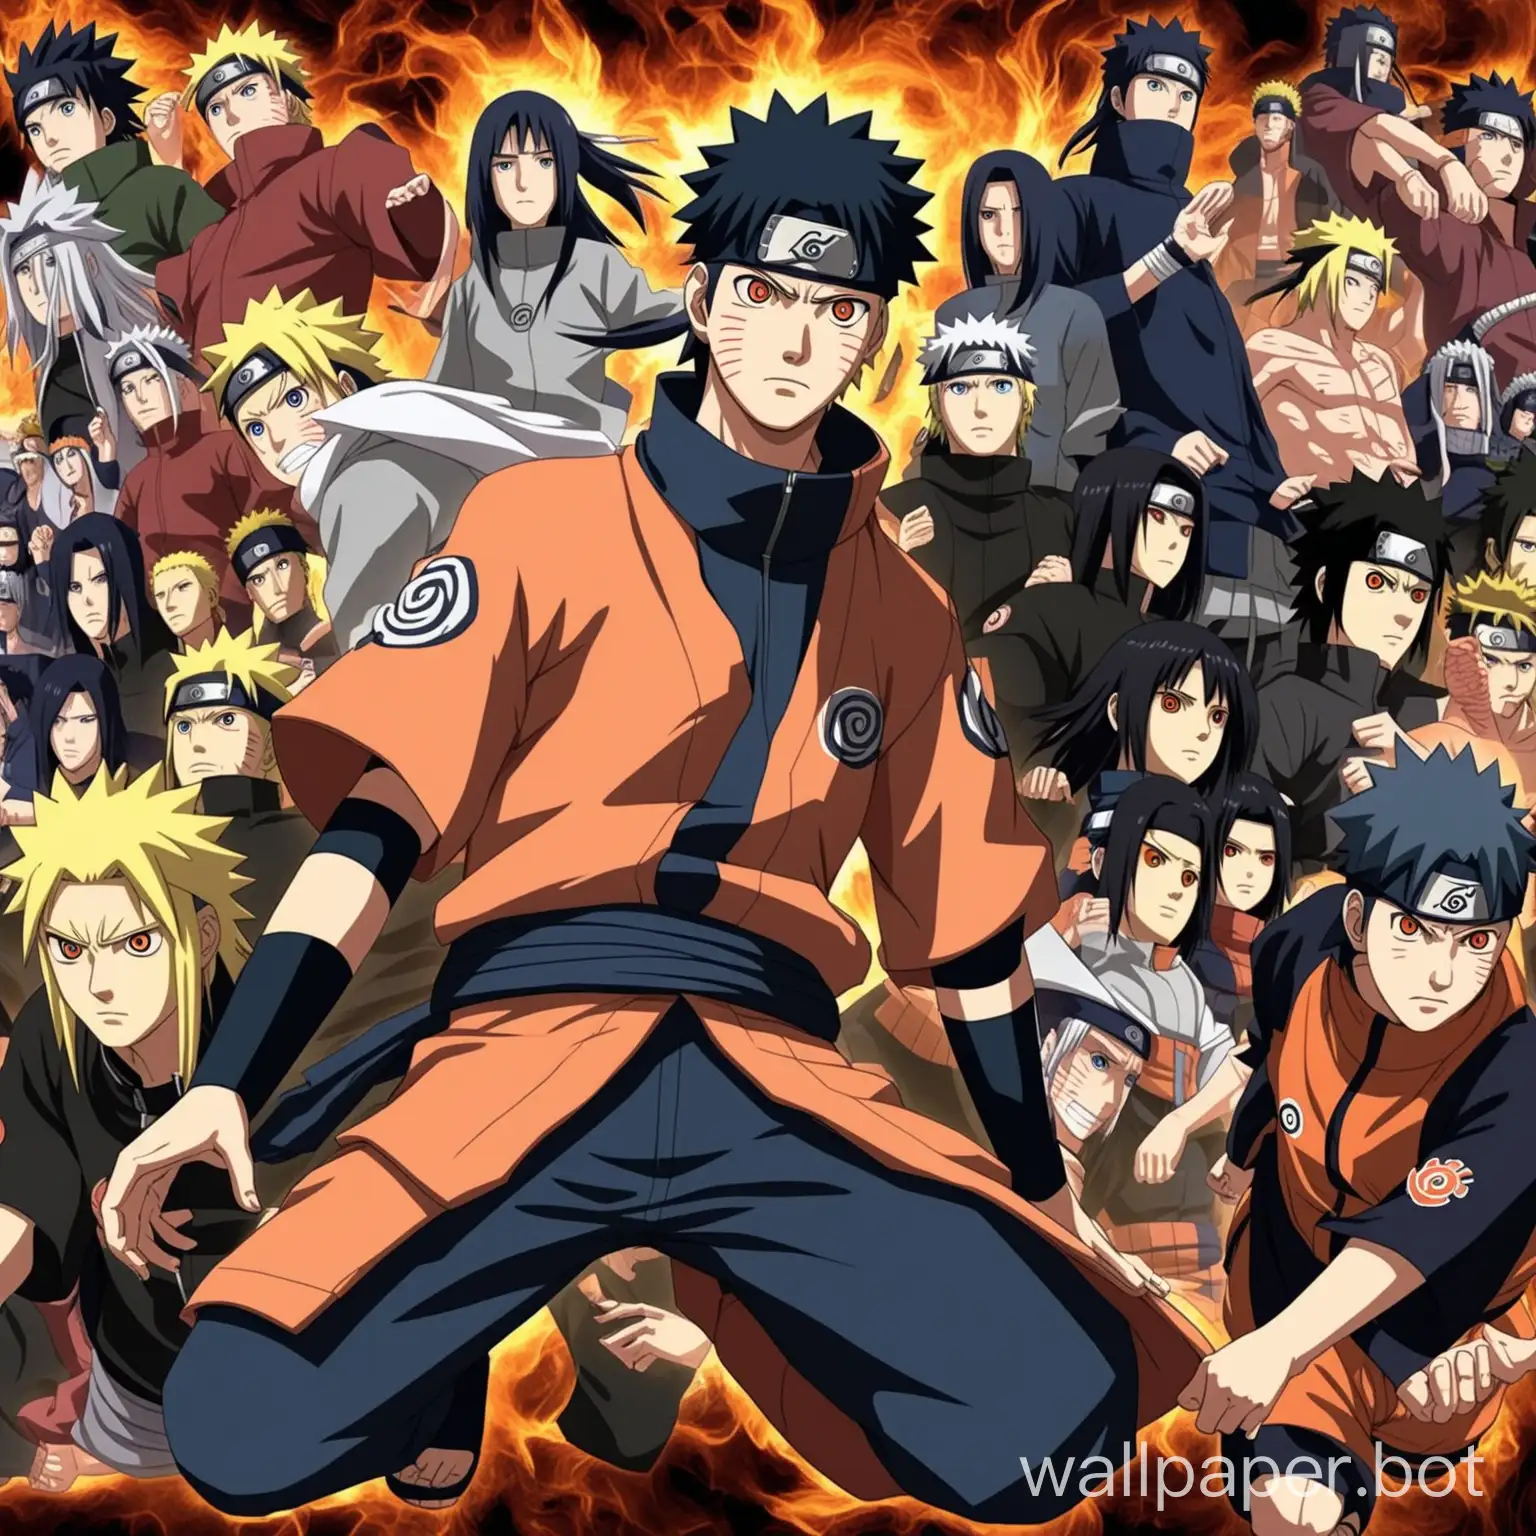 provide best wallpaper for macbook that contain the best scene from naruto shippuden